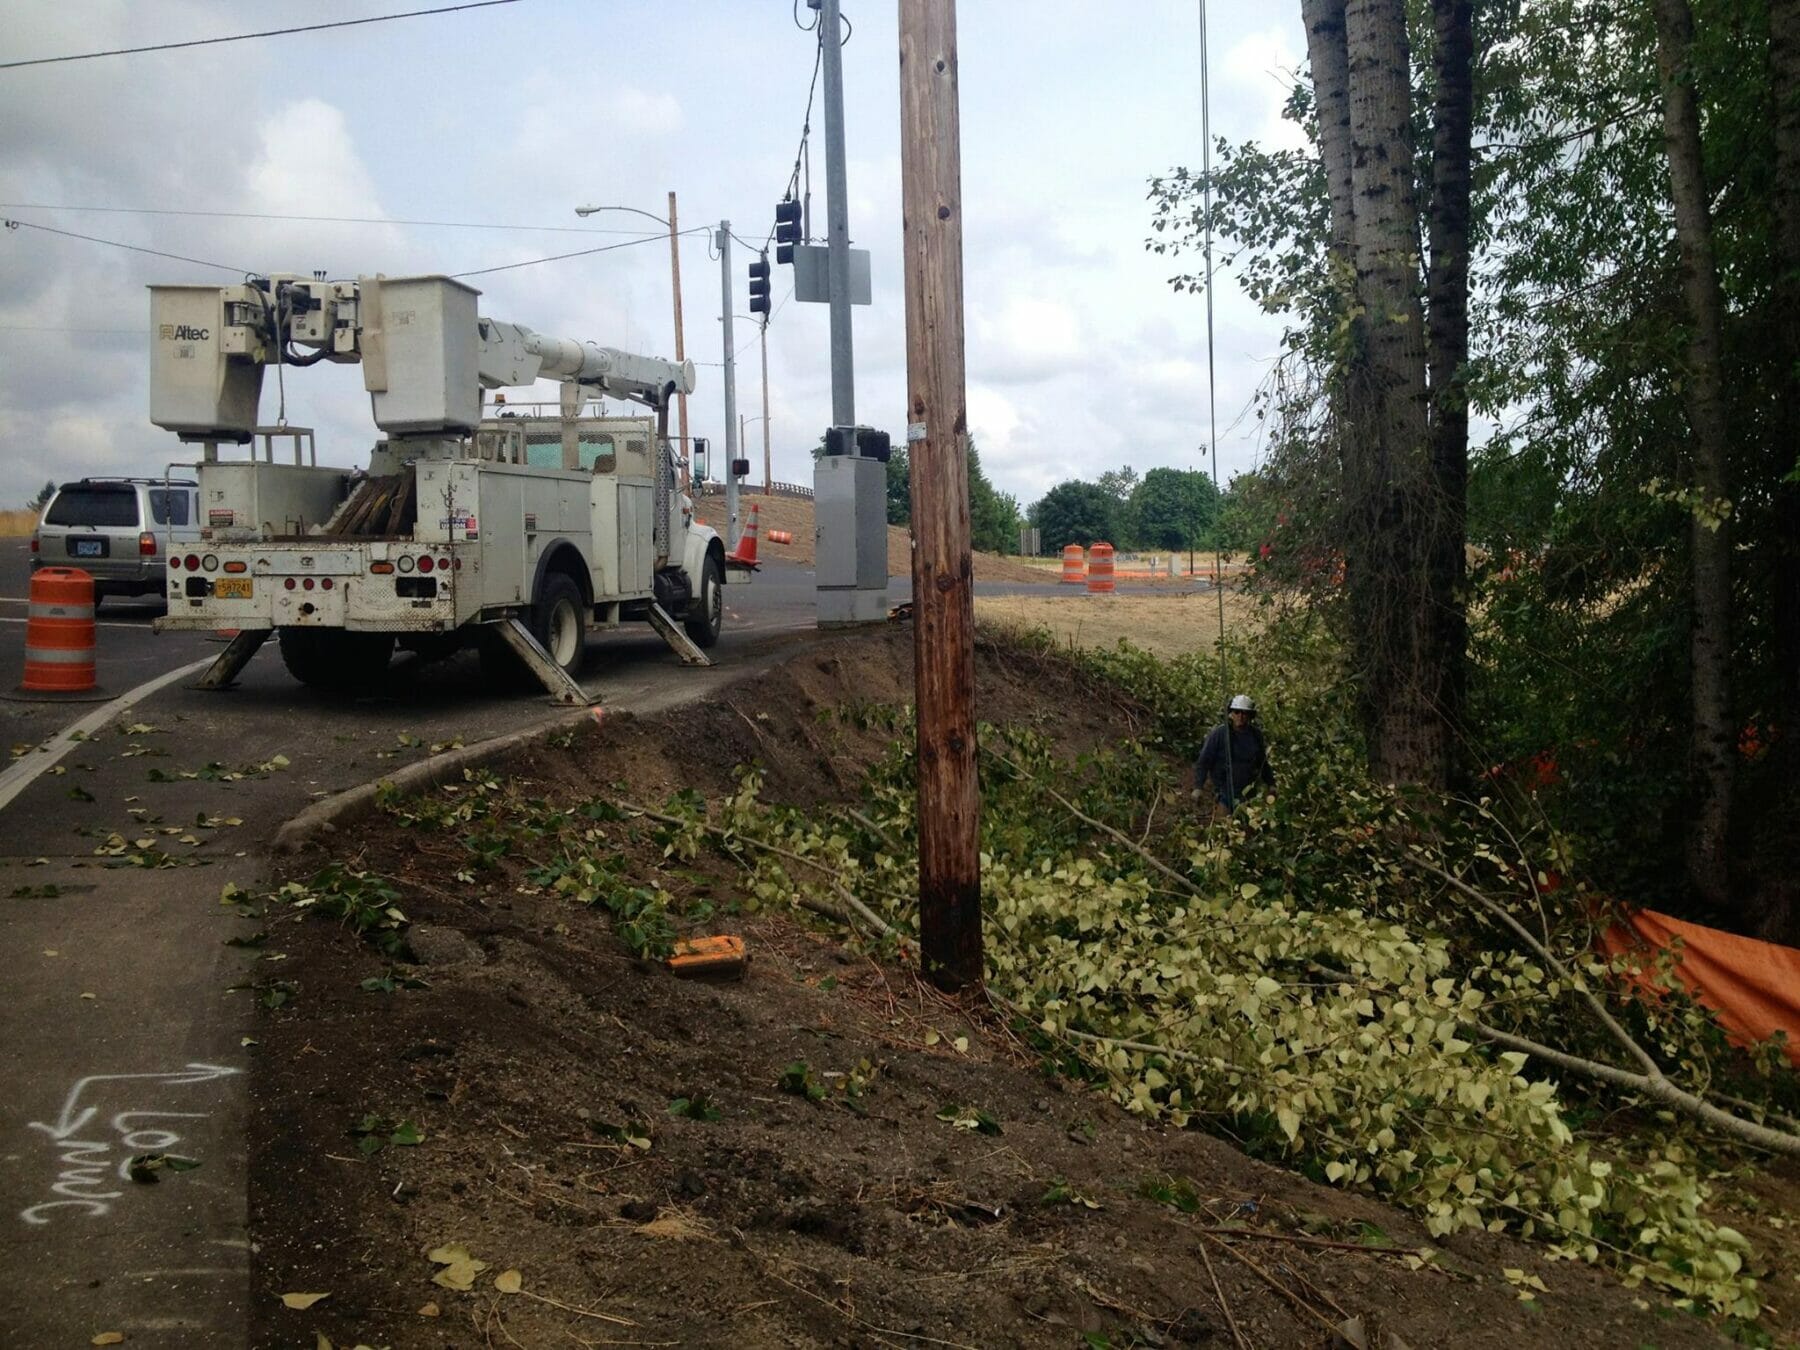 Tree removal next to power lines